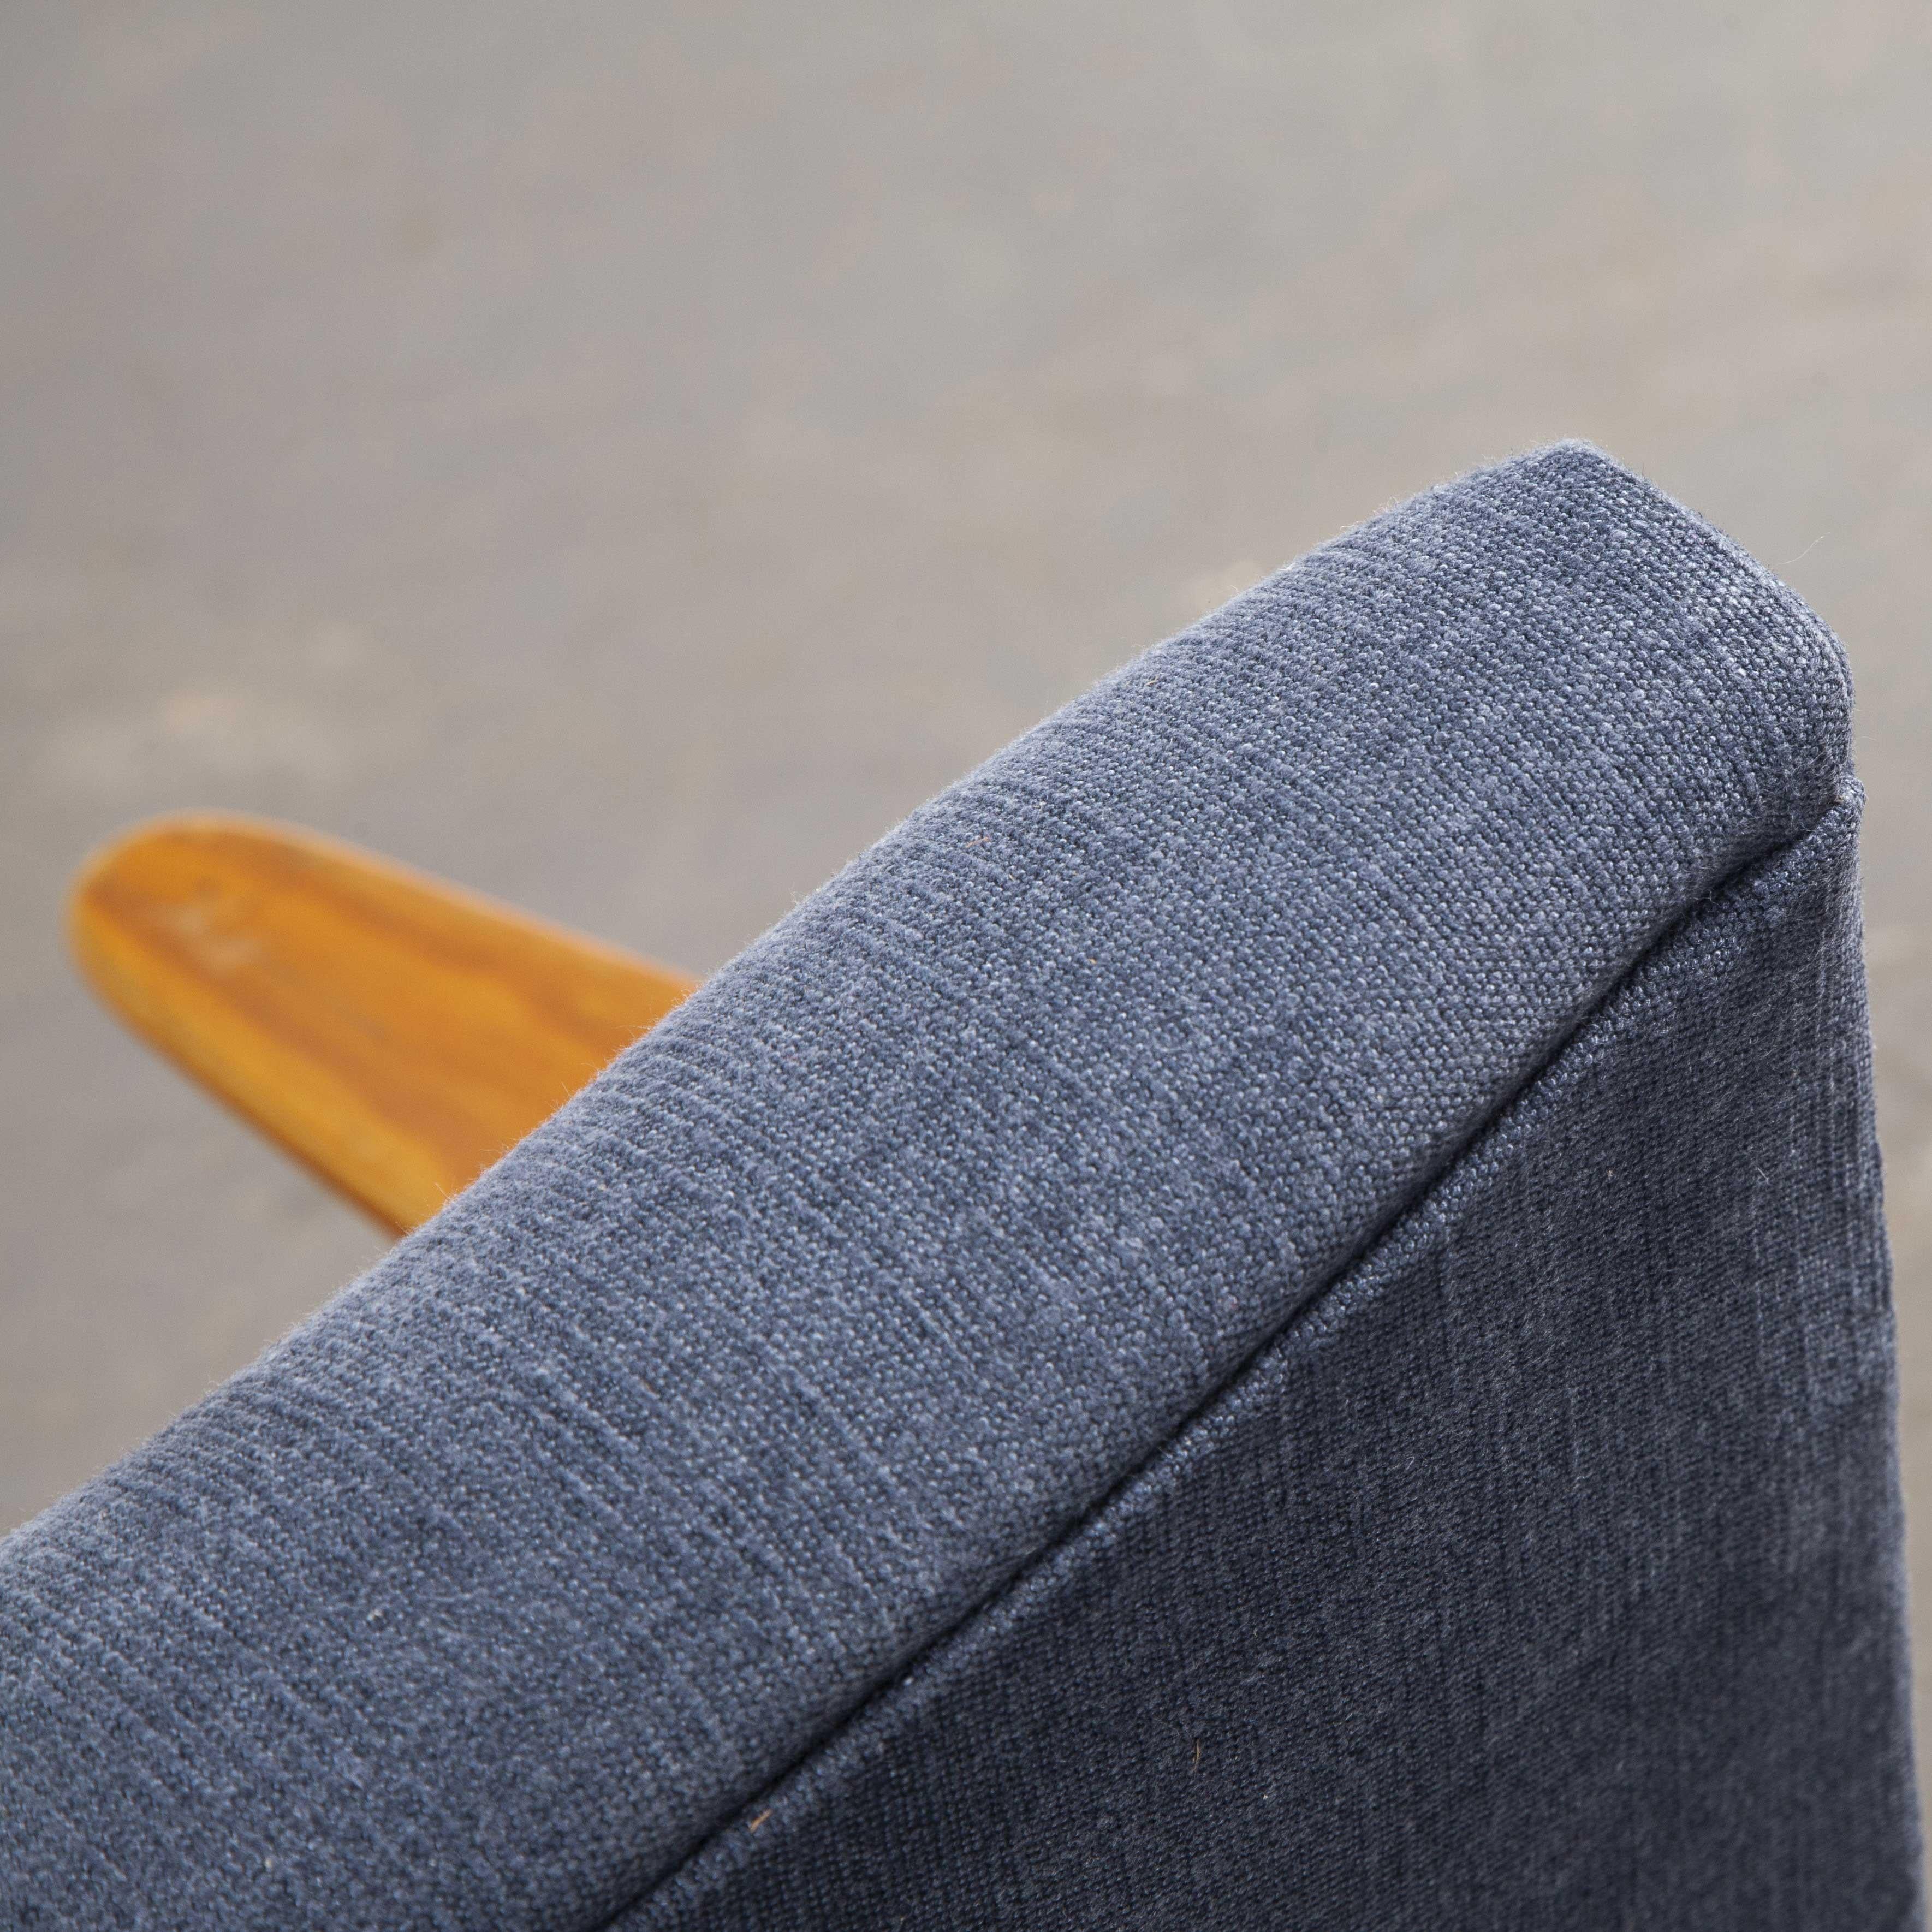 1950s midcentury pair of armchairs – Blue cotton linen upholstery

1950s midcentury pair of armchairs – blue cotton linen upholstery. Sourced in Scandinavia this is a fully restored pair of midcentury armchairs. The frame is beech throughout and